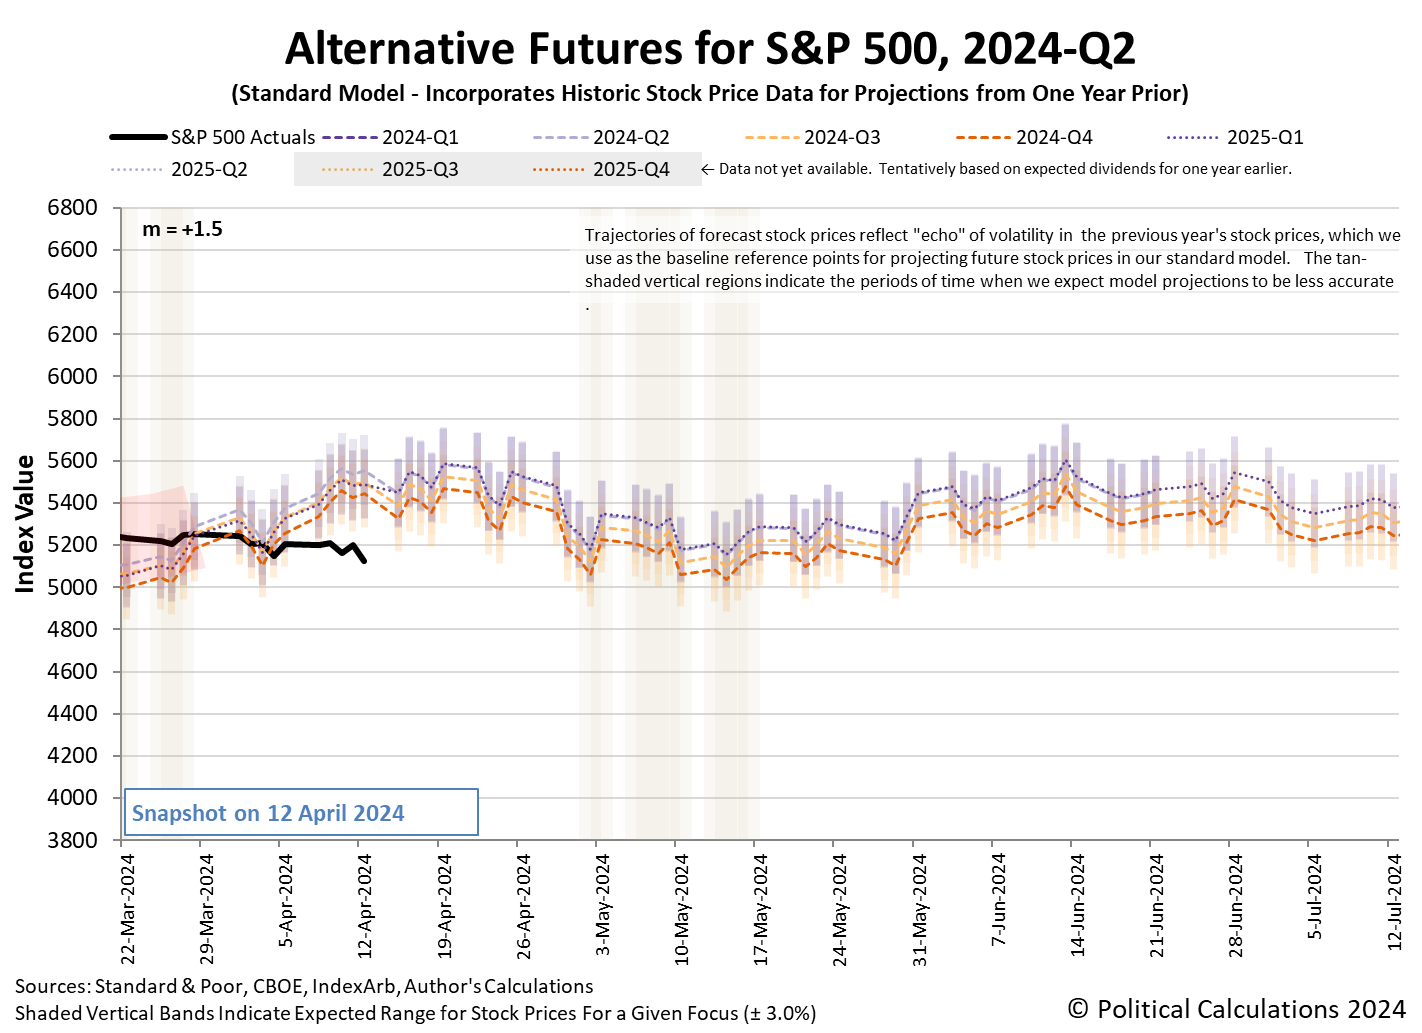 Alternative Futures - S&P 500 - 2024Q2 - Standard Model (m=+1.5 from 9 March 2023) - Snapshot on 12 Apr 2024